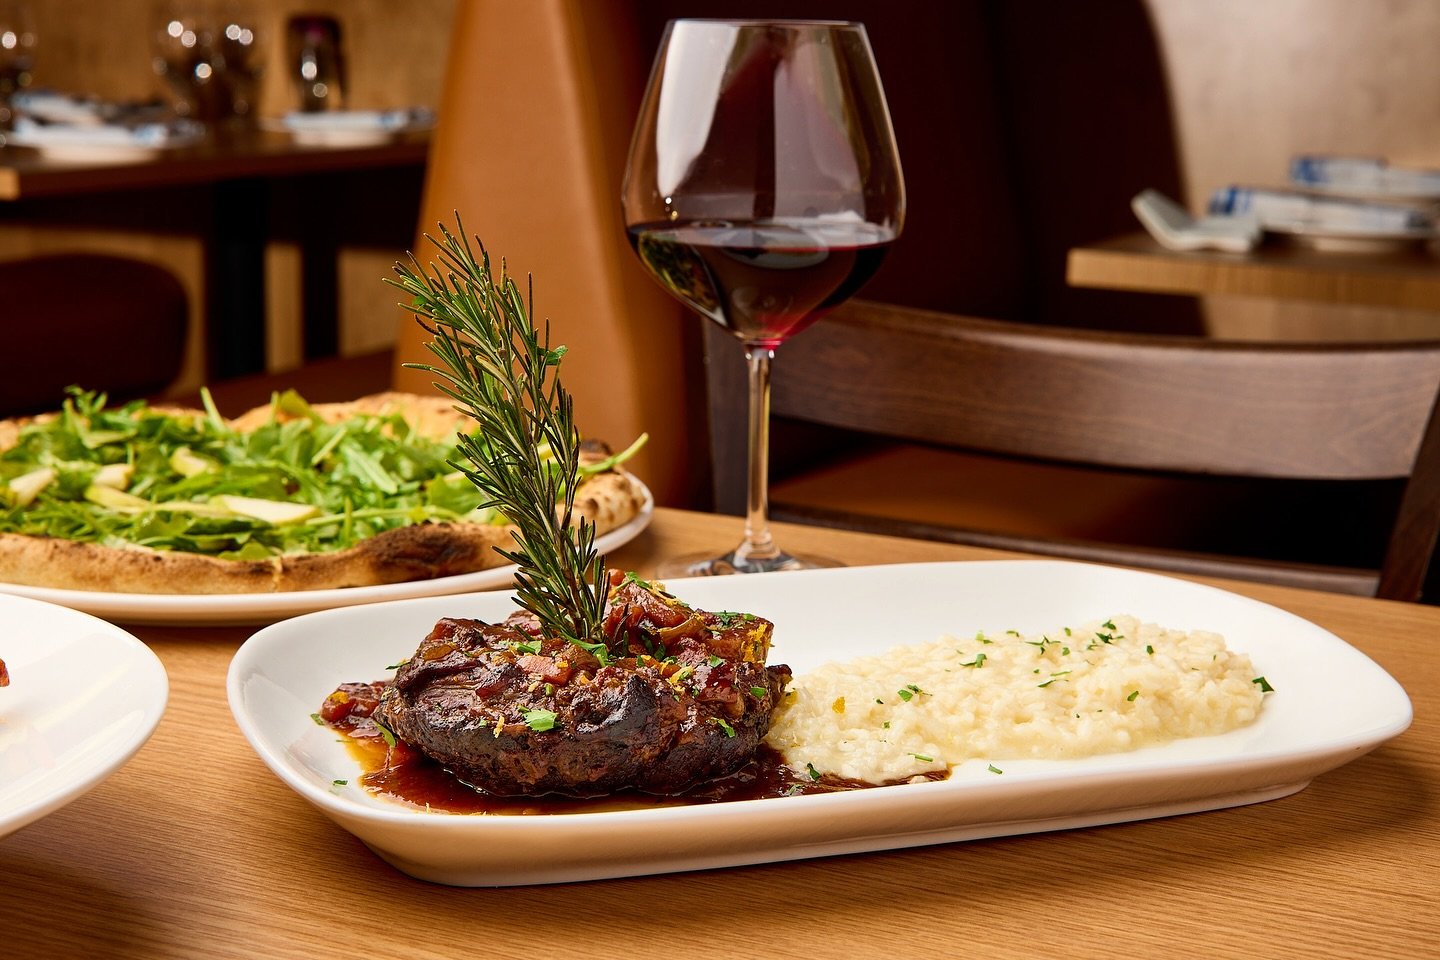 Savor the exquisite flavors of our most requested dish: Barolo Braised Veal Osso Buco with Risotto. Tender, succulent veal braised to perfection in rich Barolo wine, served alongside creamy risotto. A culinary masterpiece that will leave you craving 